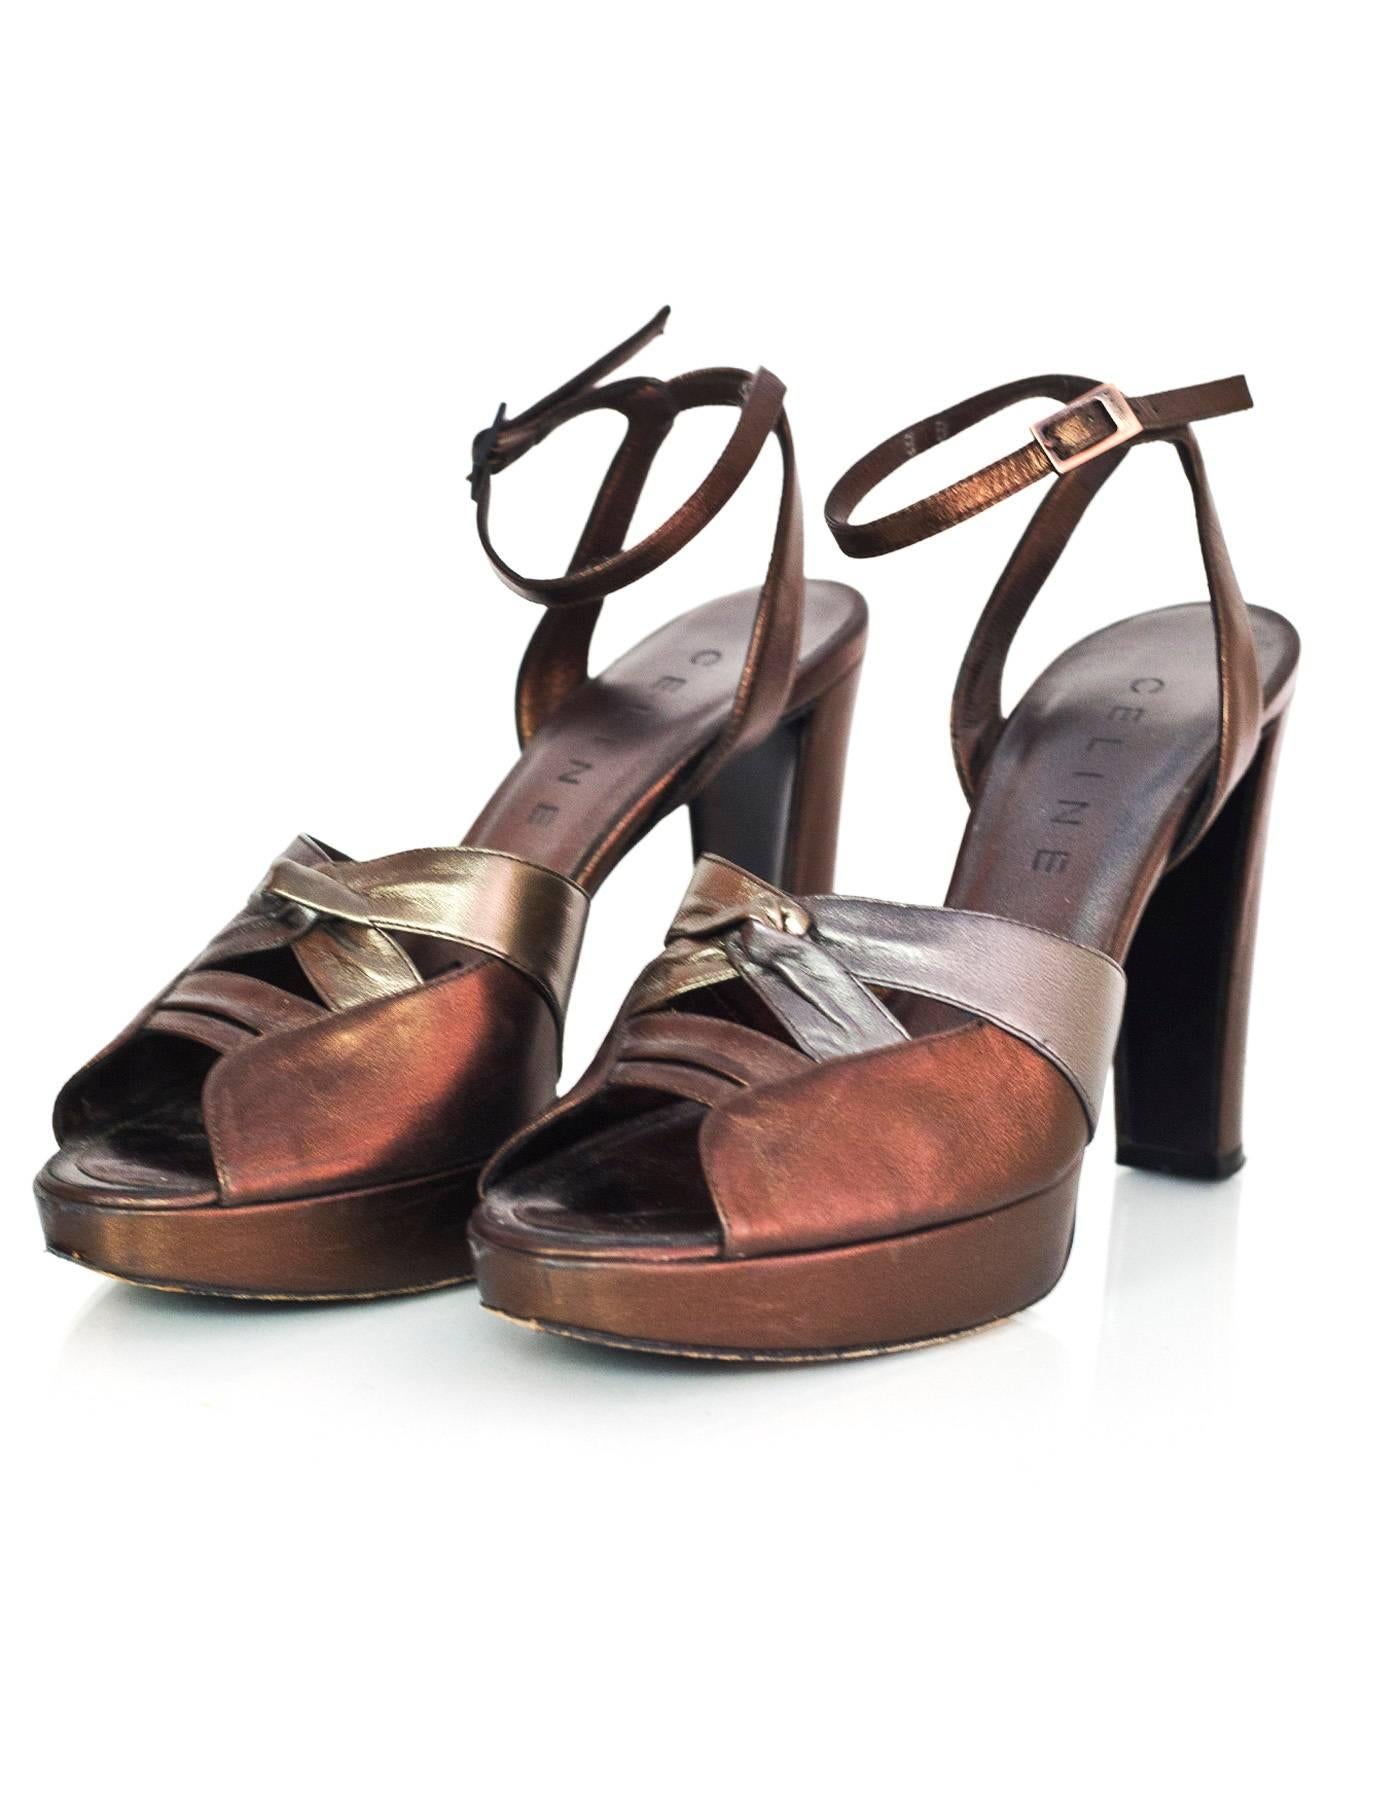 Celine Bronze & Pewter Leather Platform Pumps Sz 38

Made In: Italy
Color: Brown, pewter
Materials: Leather
Closure/Opening: Buckle closure at ankle
Sole Stamp: Celine 38 Made in Italy
Overall Condition: Excellent pre-owned condition with very